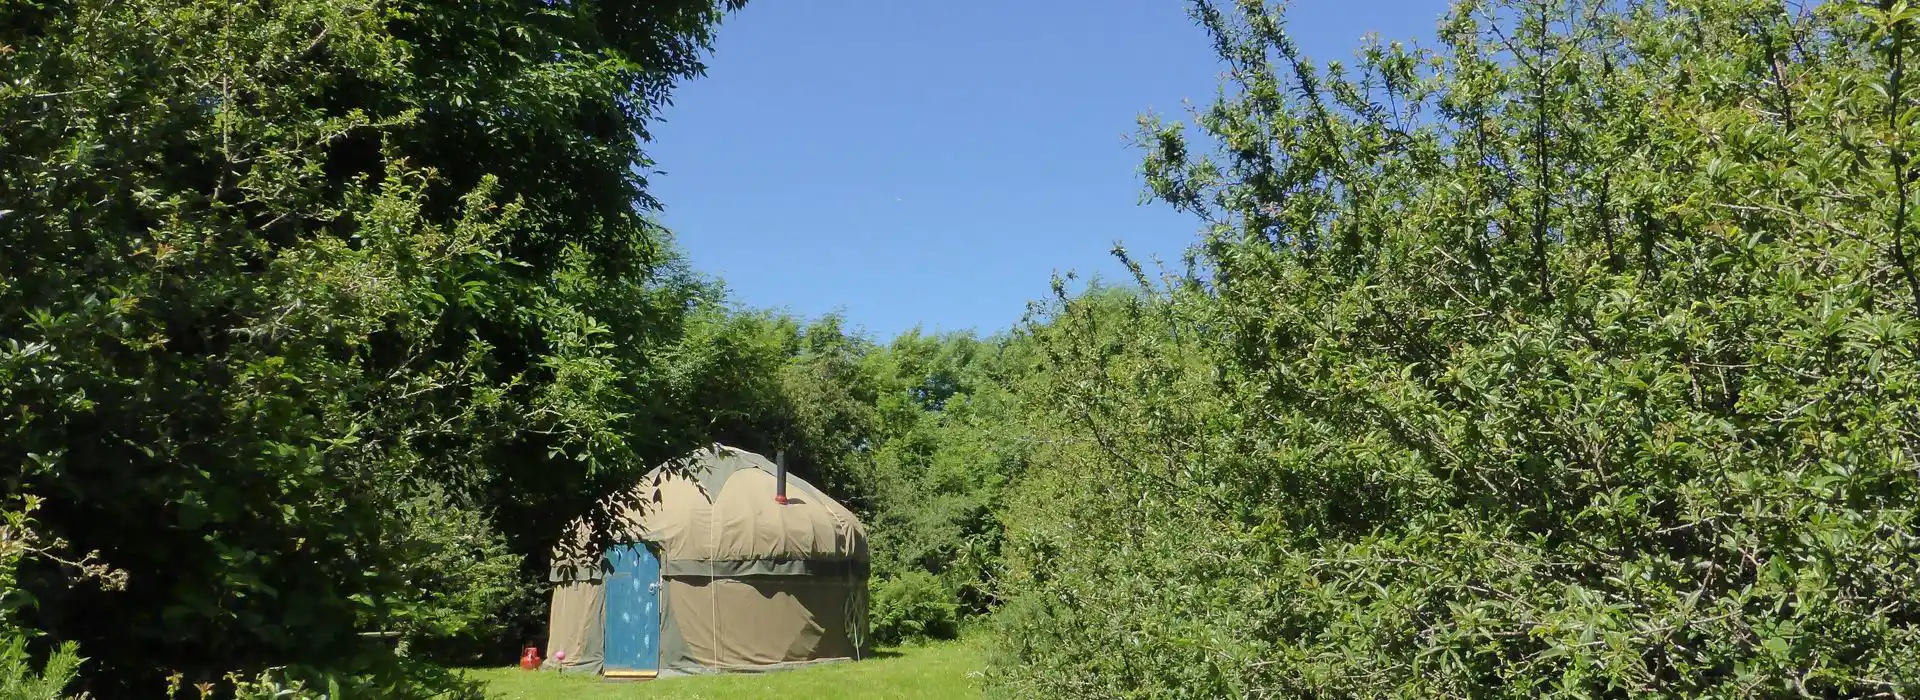 Yurt holidays in Anglesey